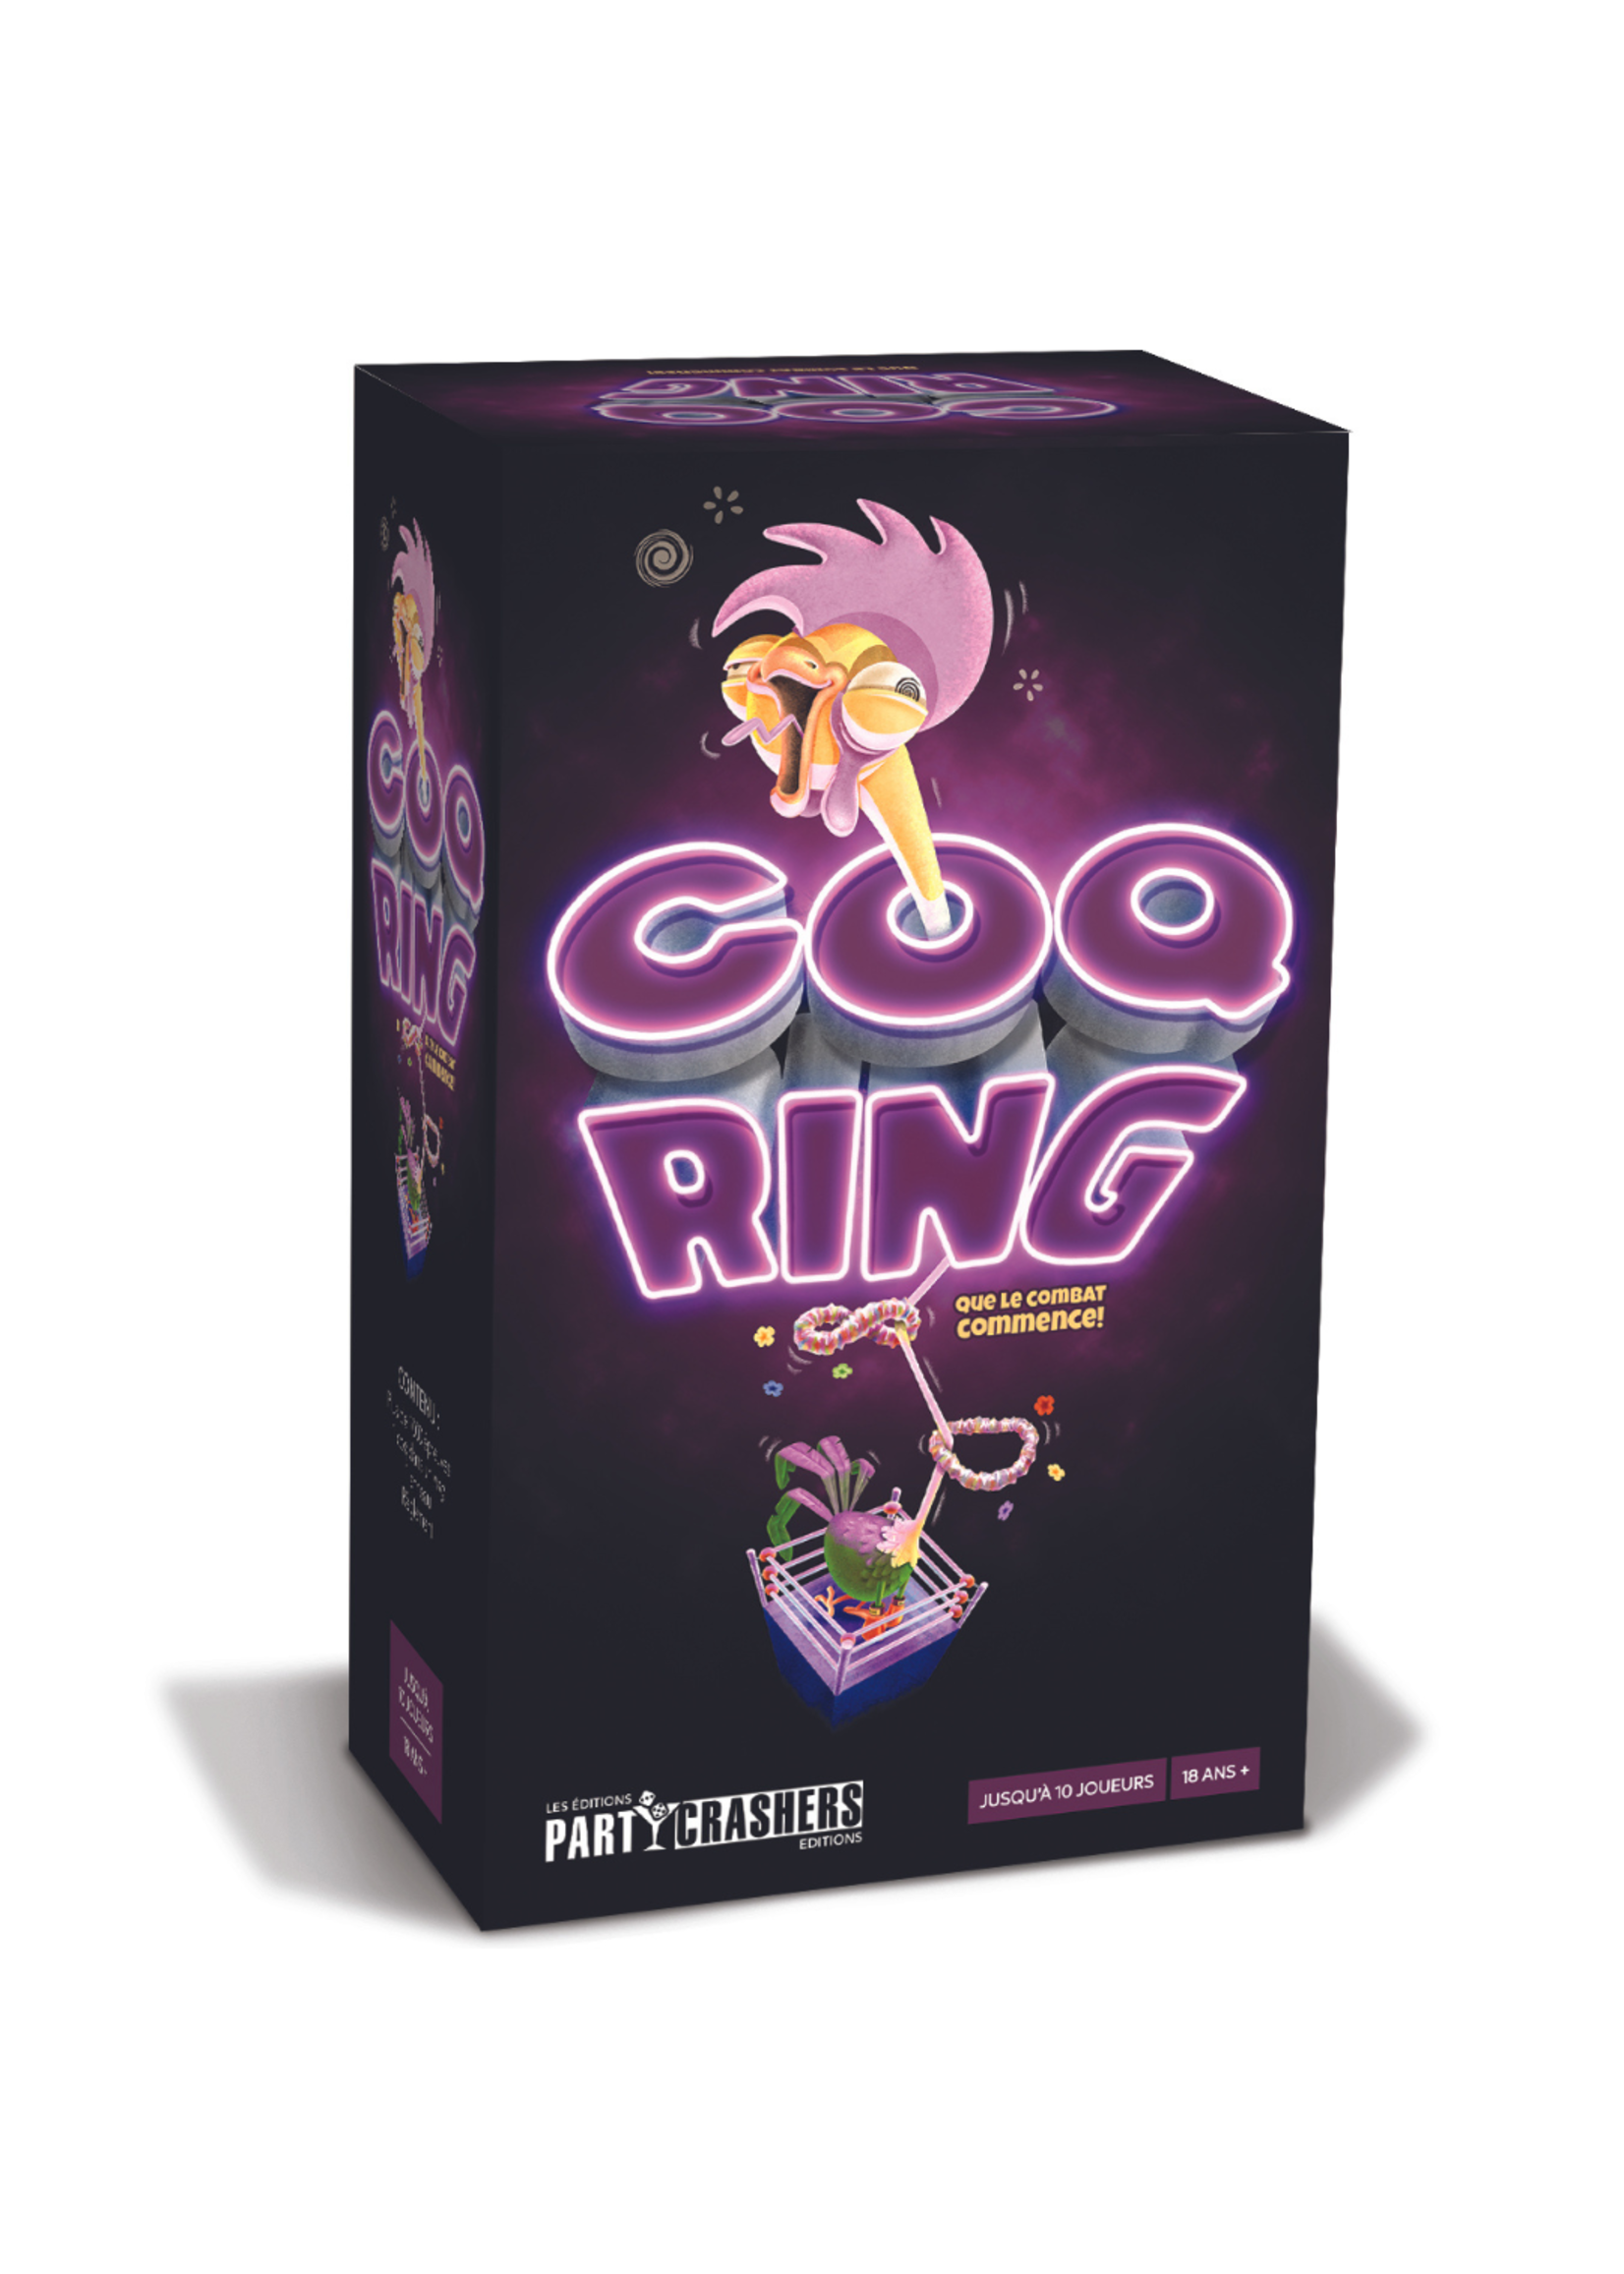 Party Crashers Coq ring